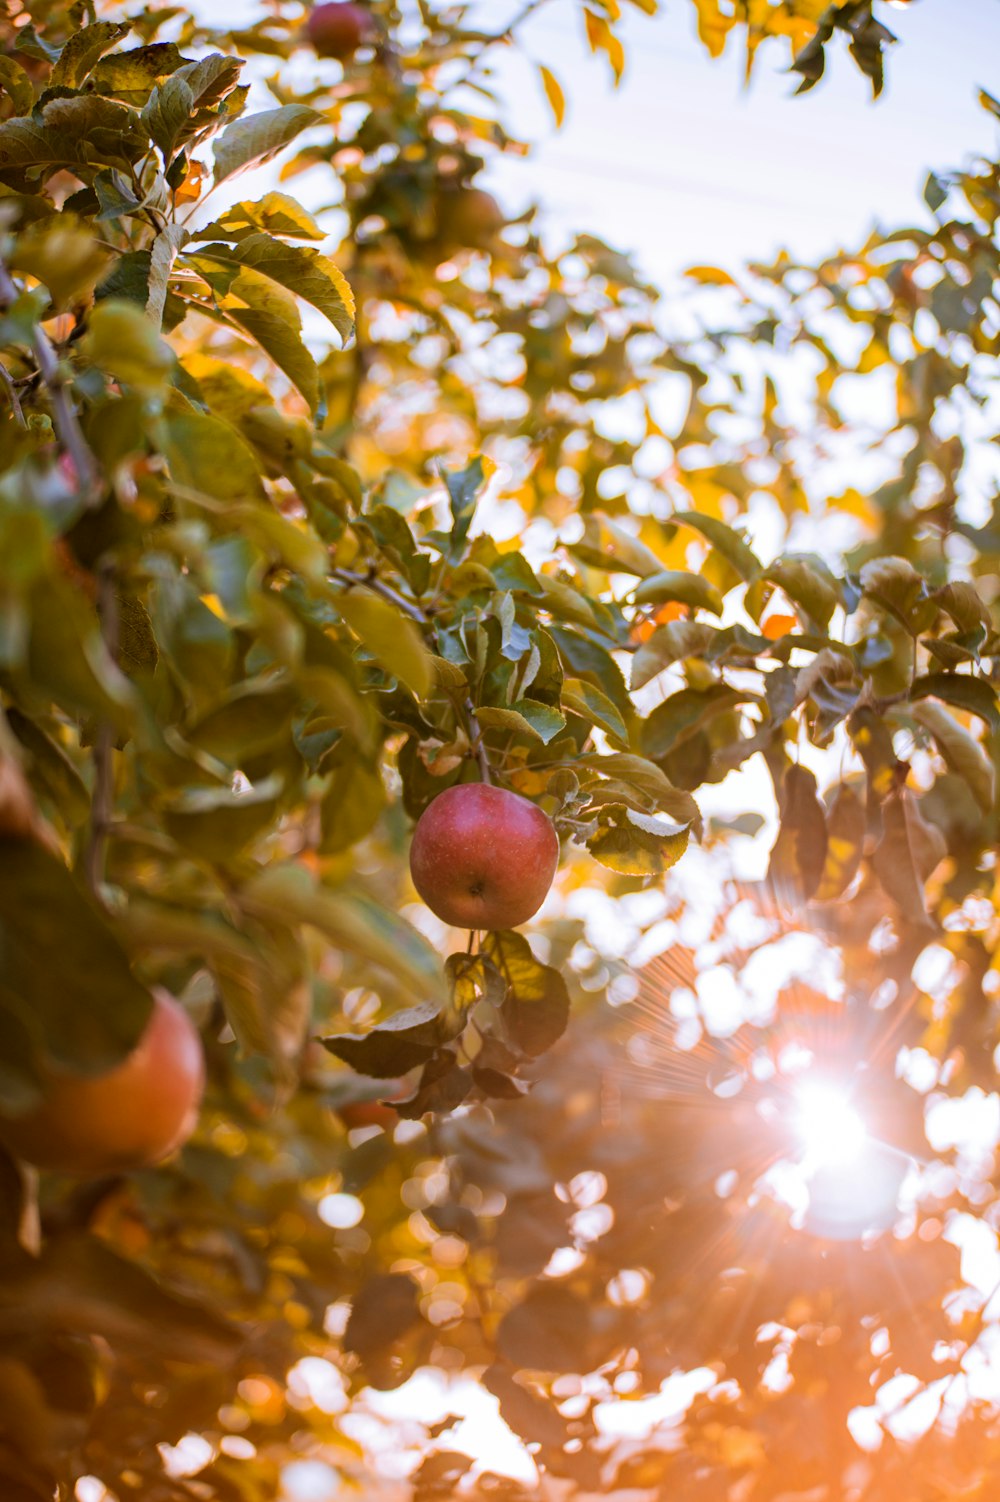 the sun shines through the leaves of an apple tree